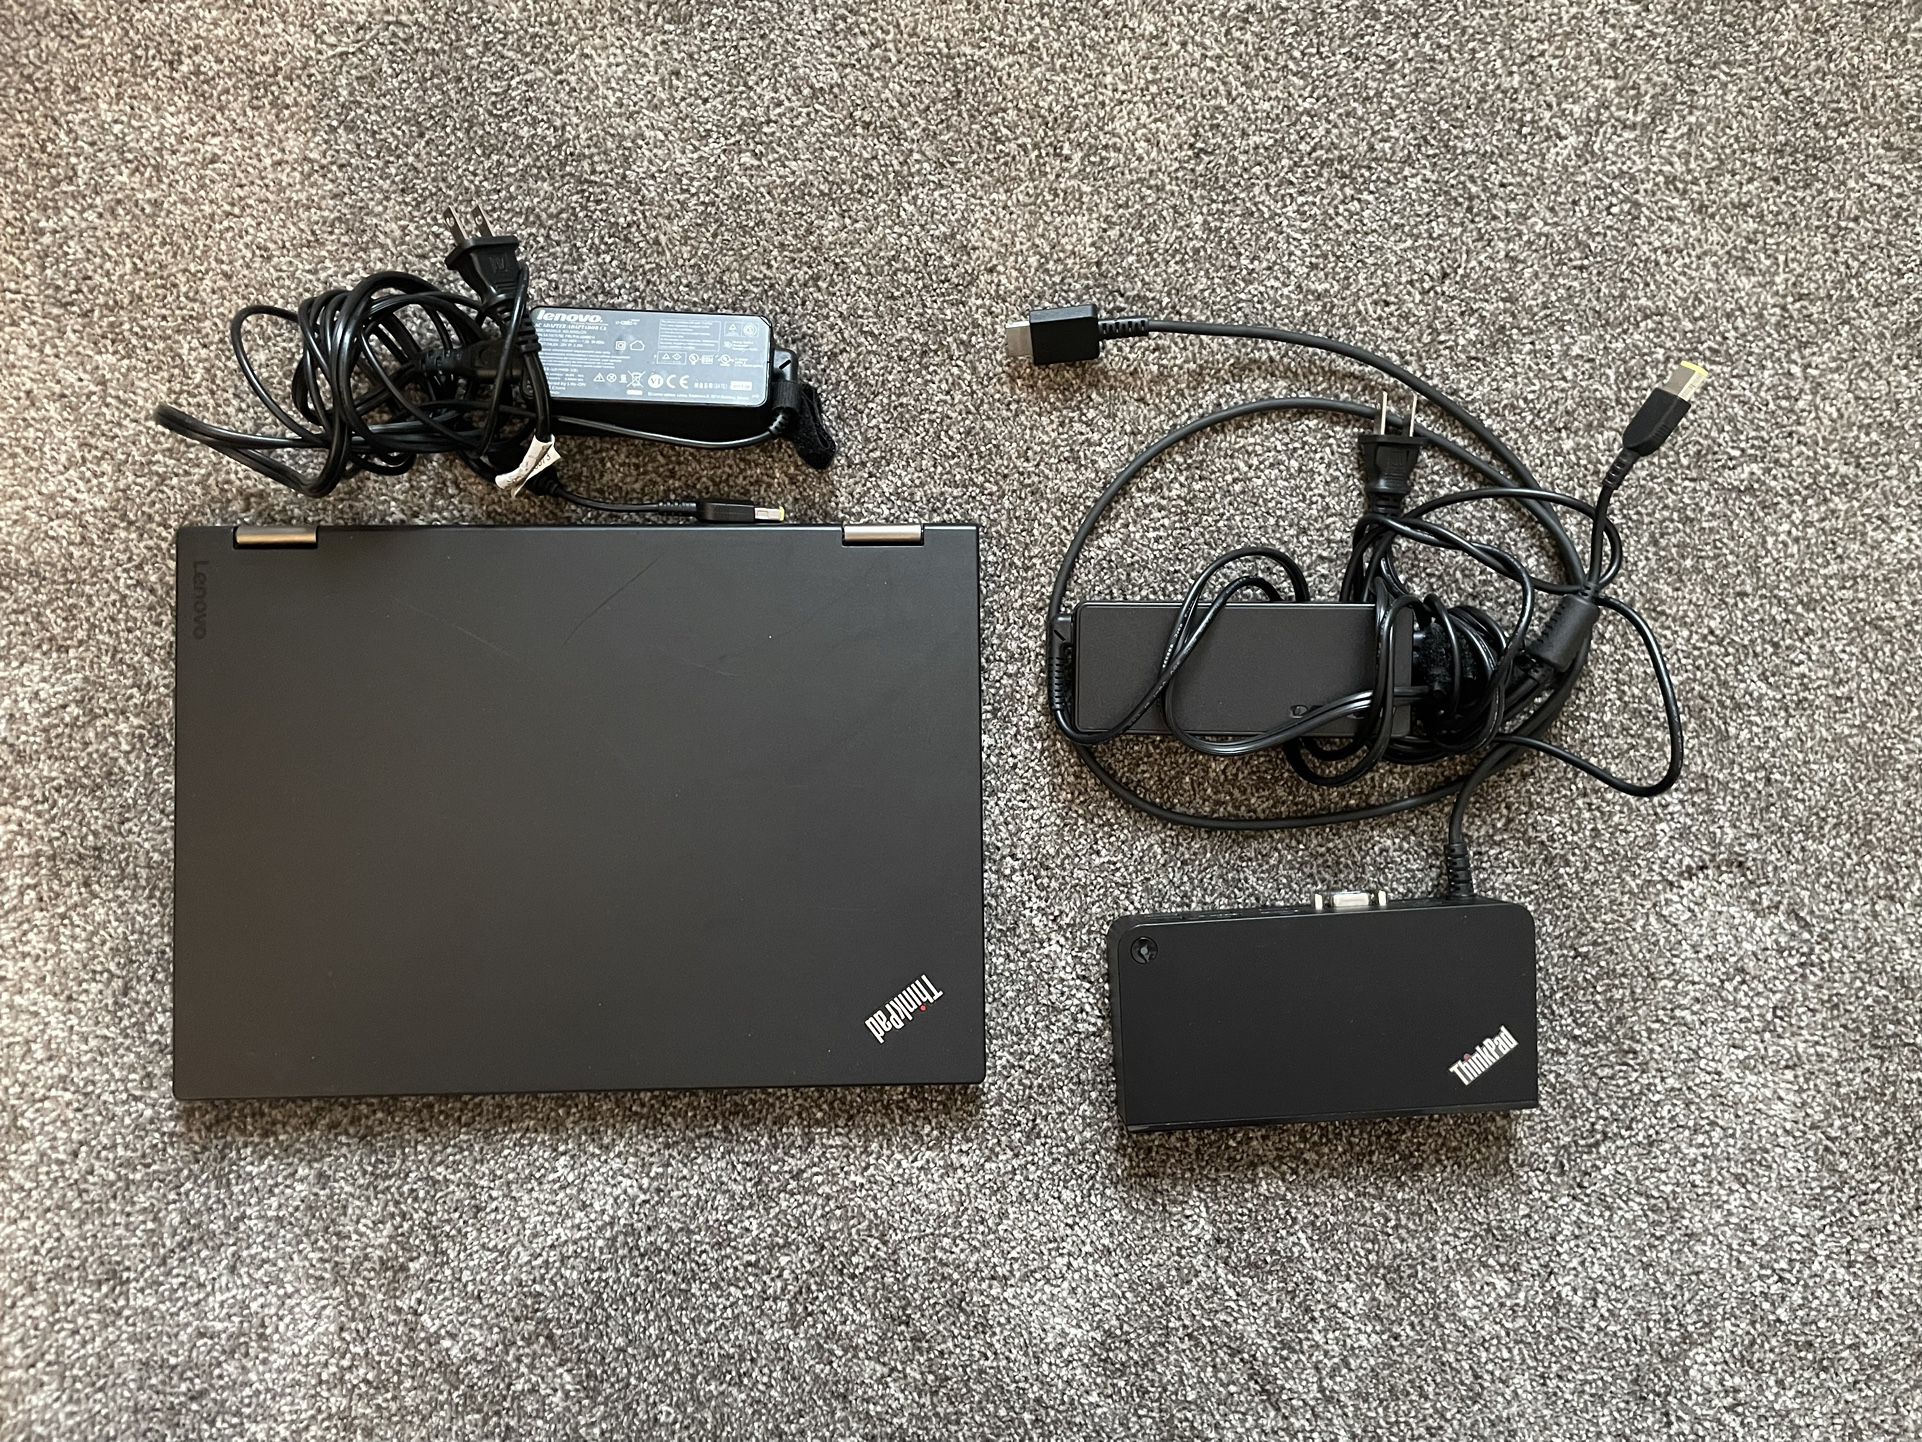 Lenovo ThinkPad Yoga 260 (2-in-1) with Dock and Charger